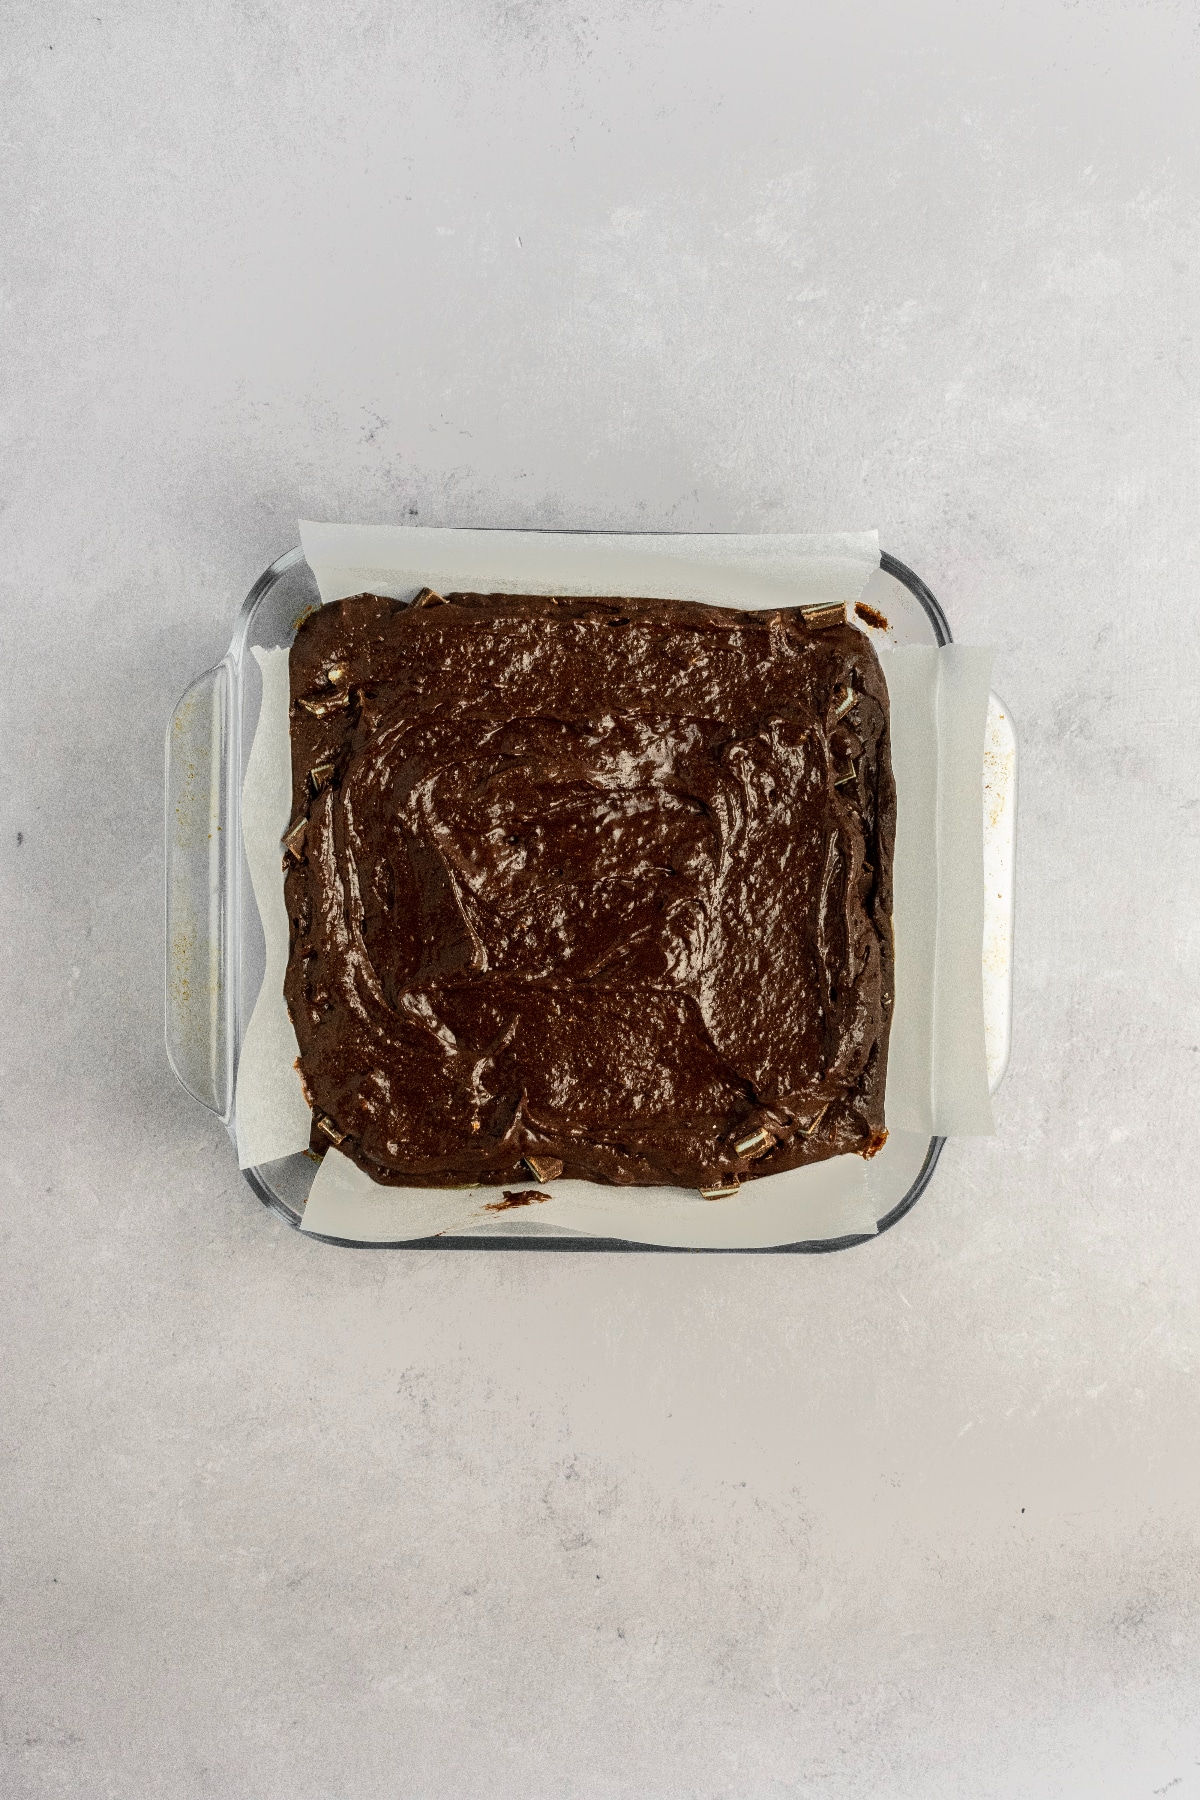 A baking pan full of brownie batter ready to bake.